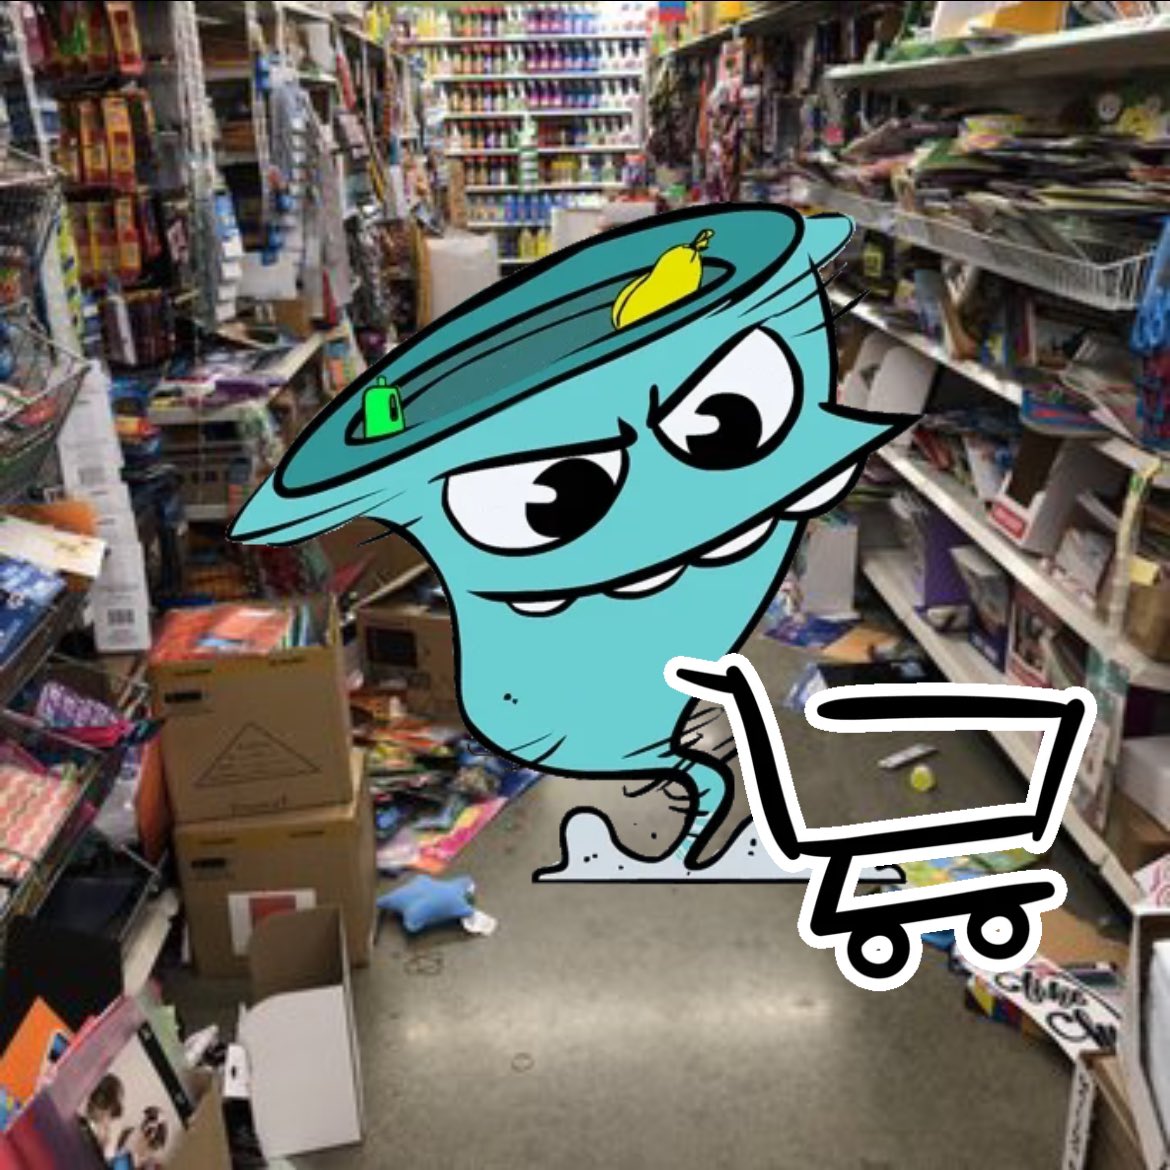 #Customer in the wild. Just moments prior to blaming #retailworkers for the mess.
**Picture courtesy of Google**
#retailhell #messycustomers #entitled